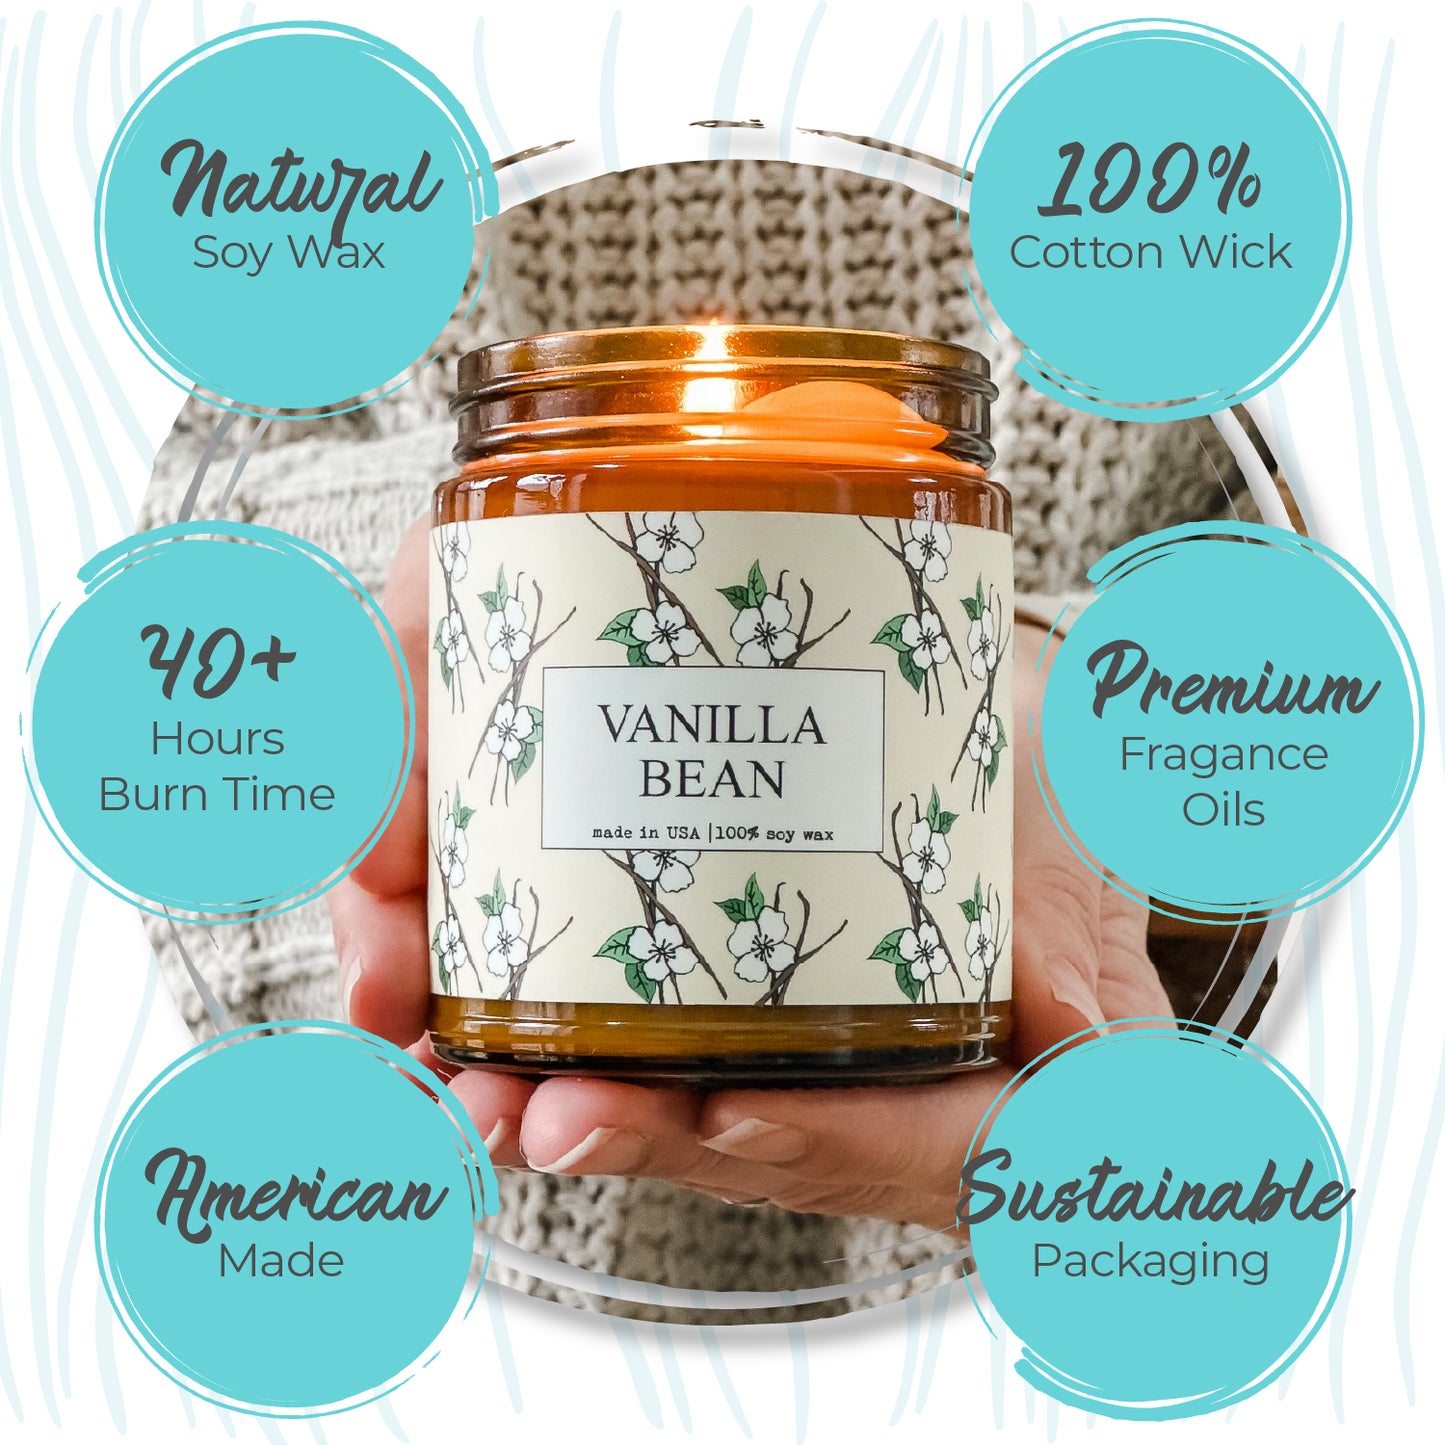 When Life Gives You A Dumpster Fire, Roast Marshmallows - 9oz Glass Jar Candle - Chocolate Brownie Scent